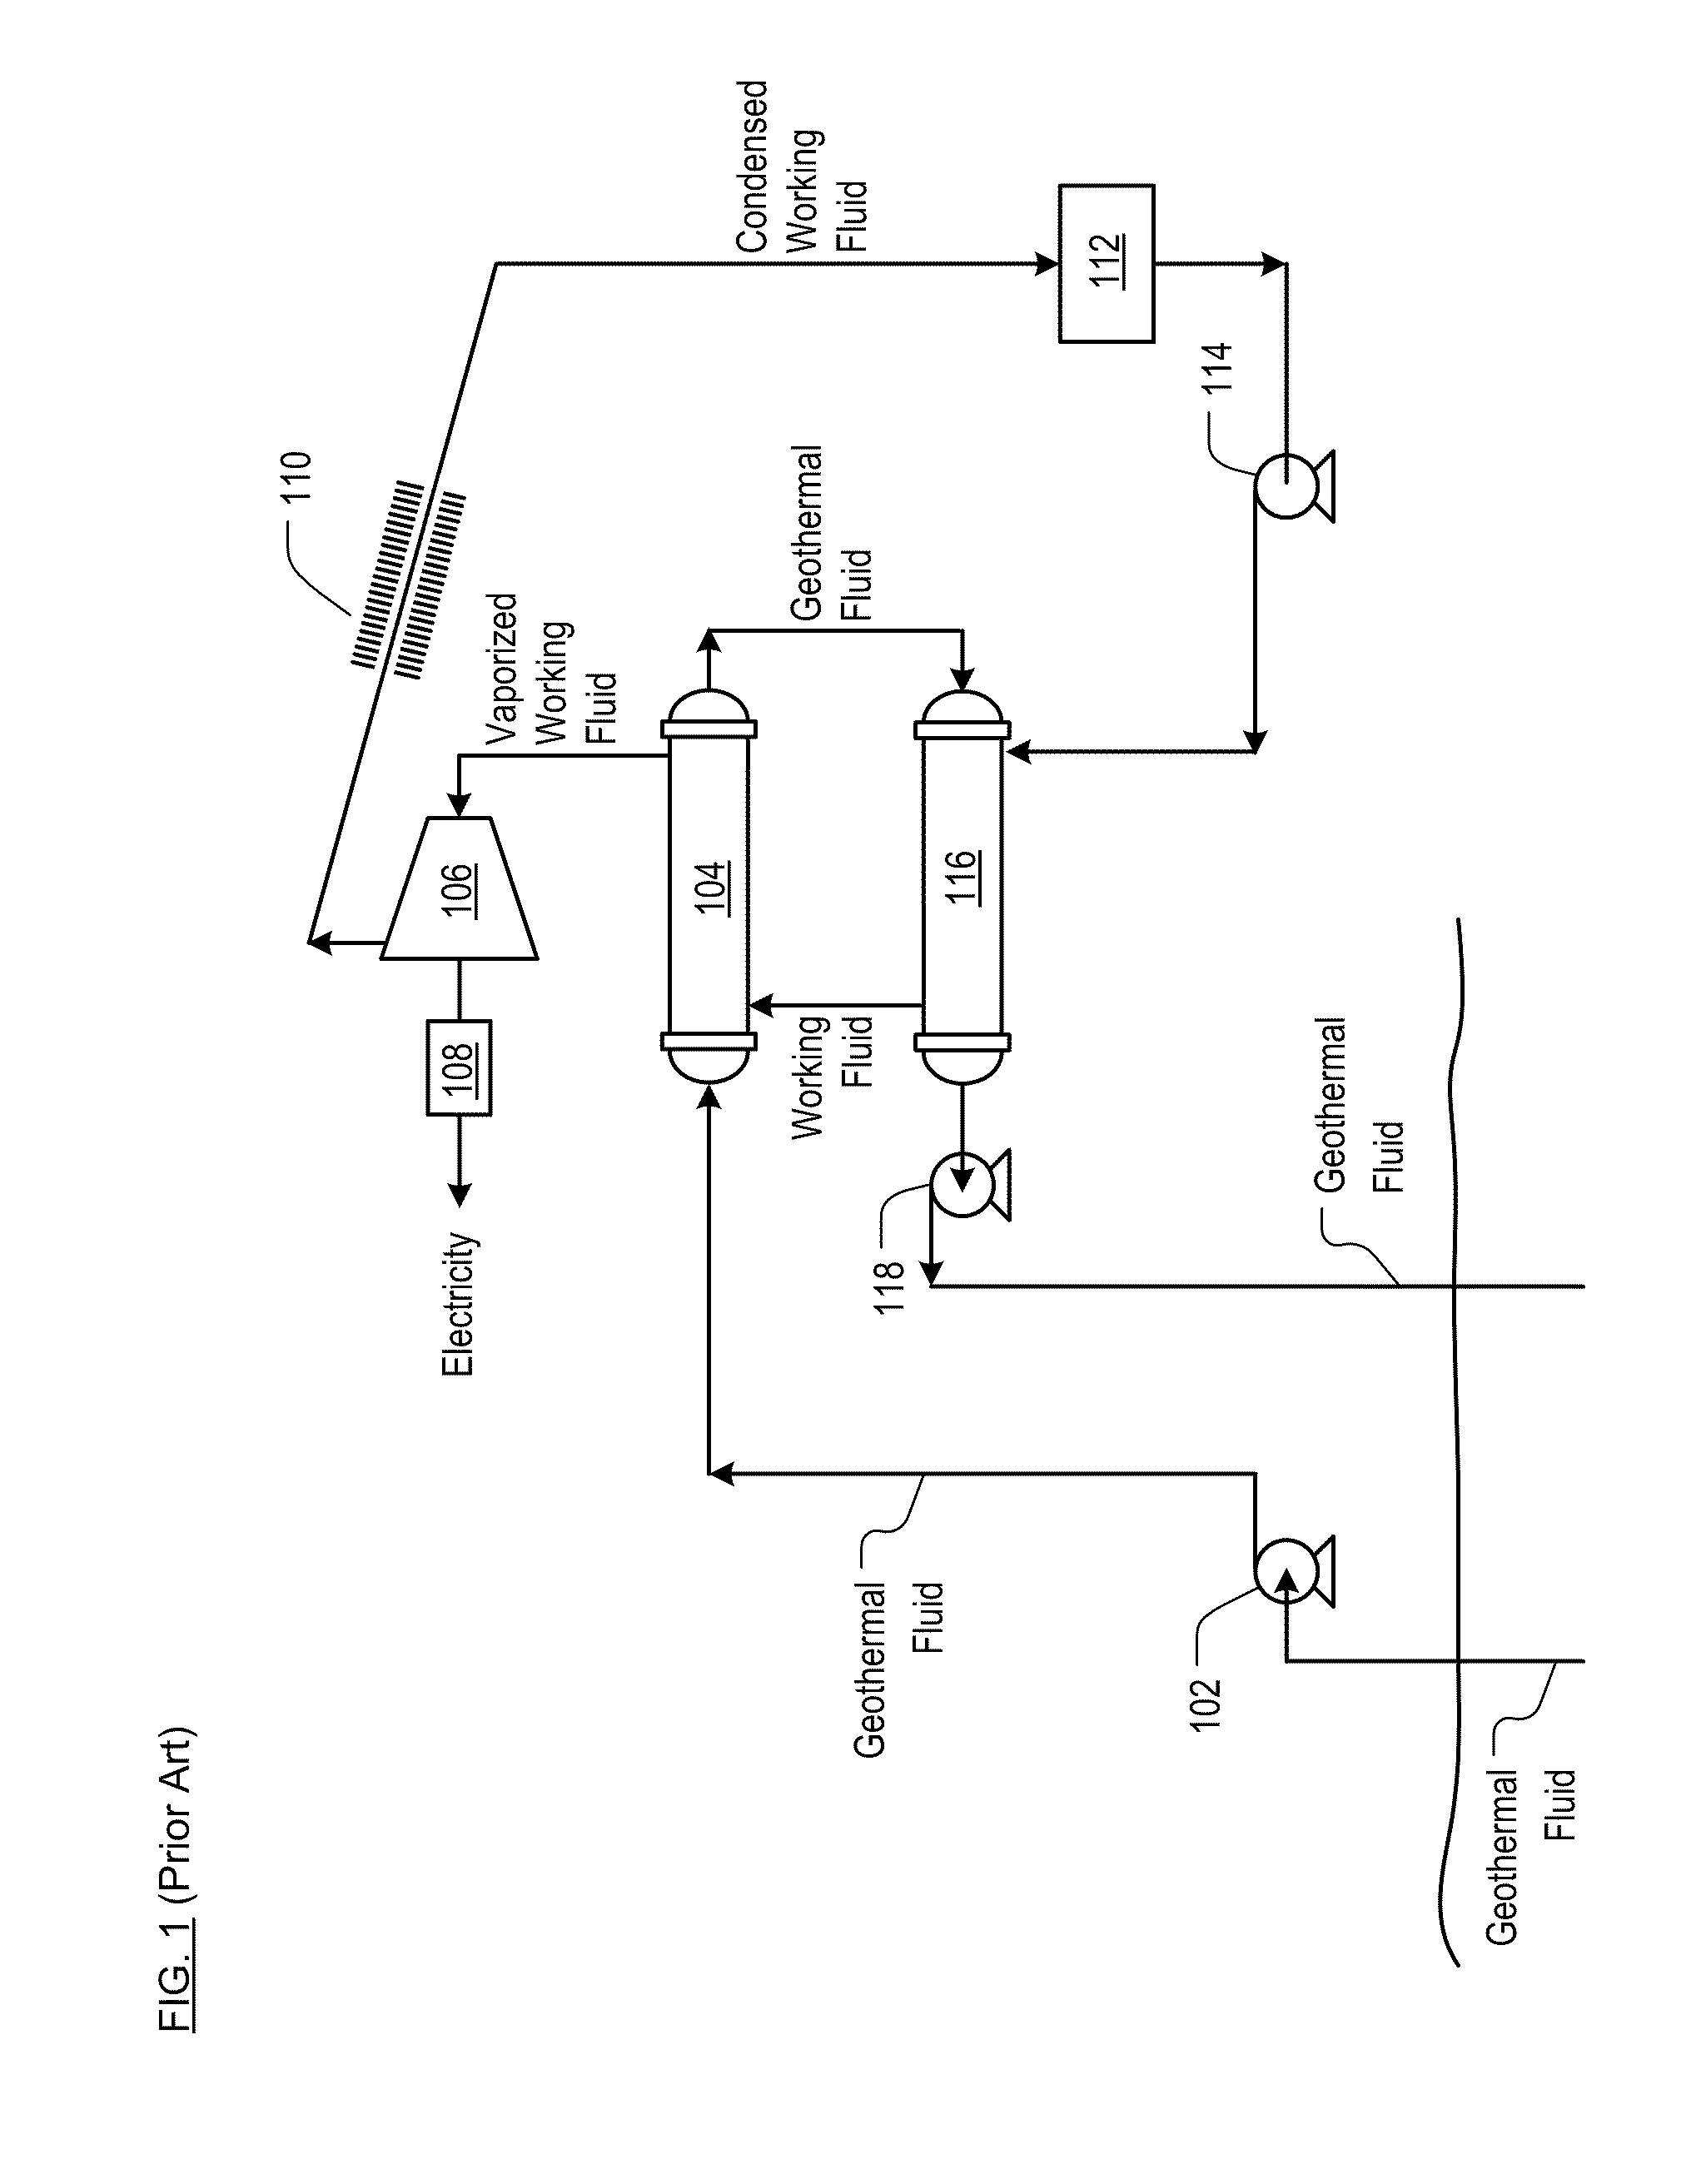 Working-Fluid Power System for Low-Temperature Rankine Cycles